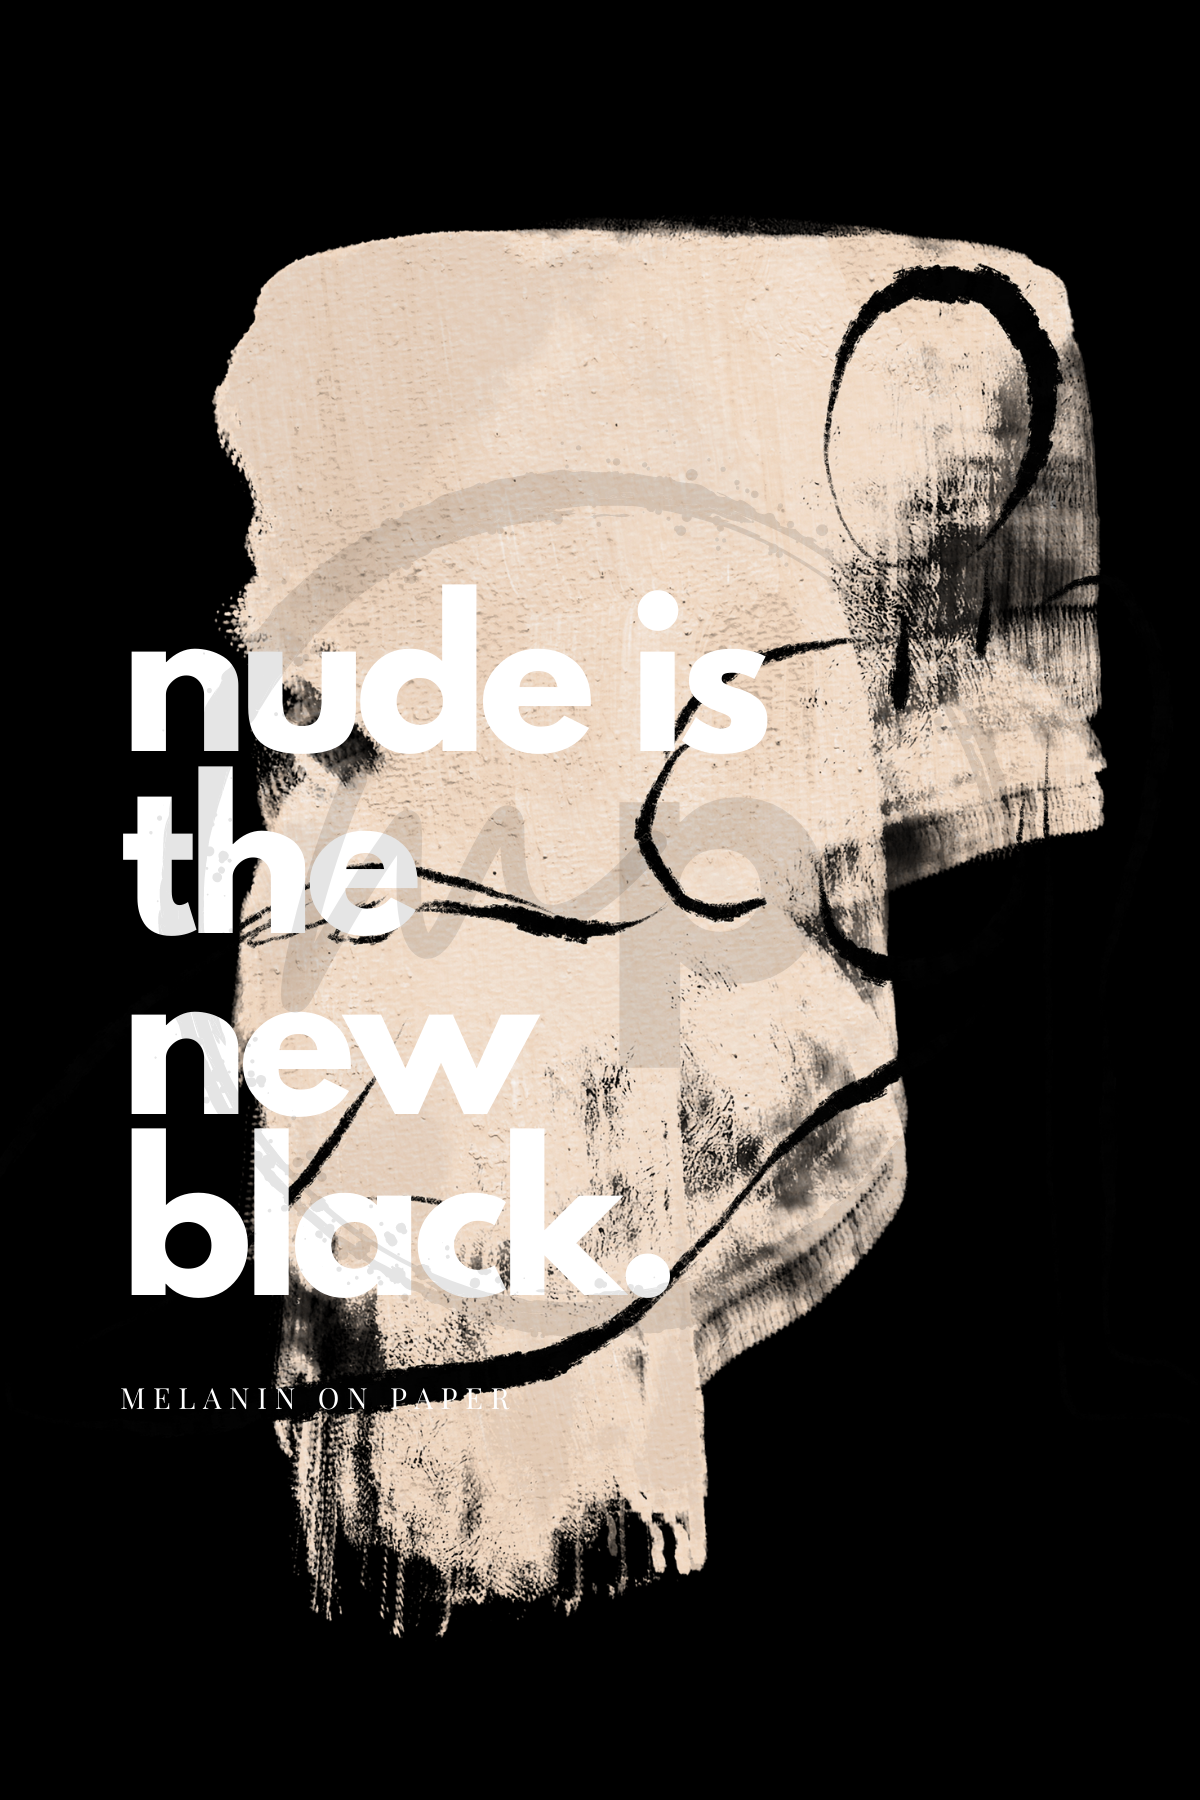 "nude is the new black" Printable Journaling Card - 2 Sizes Available